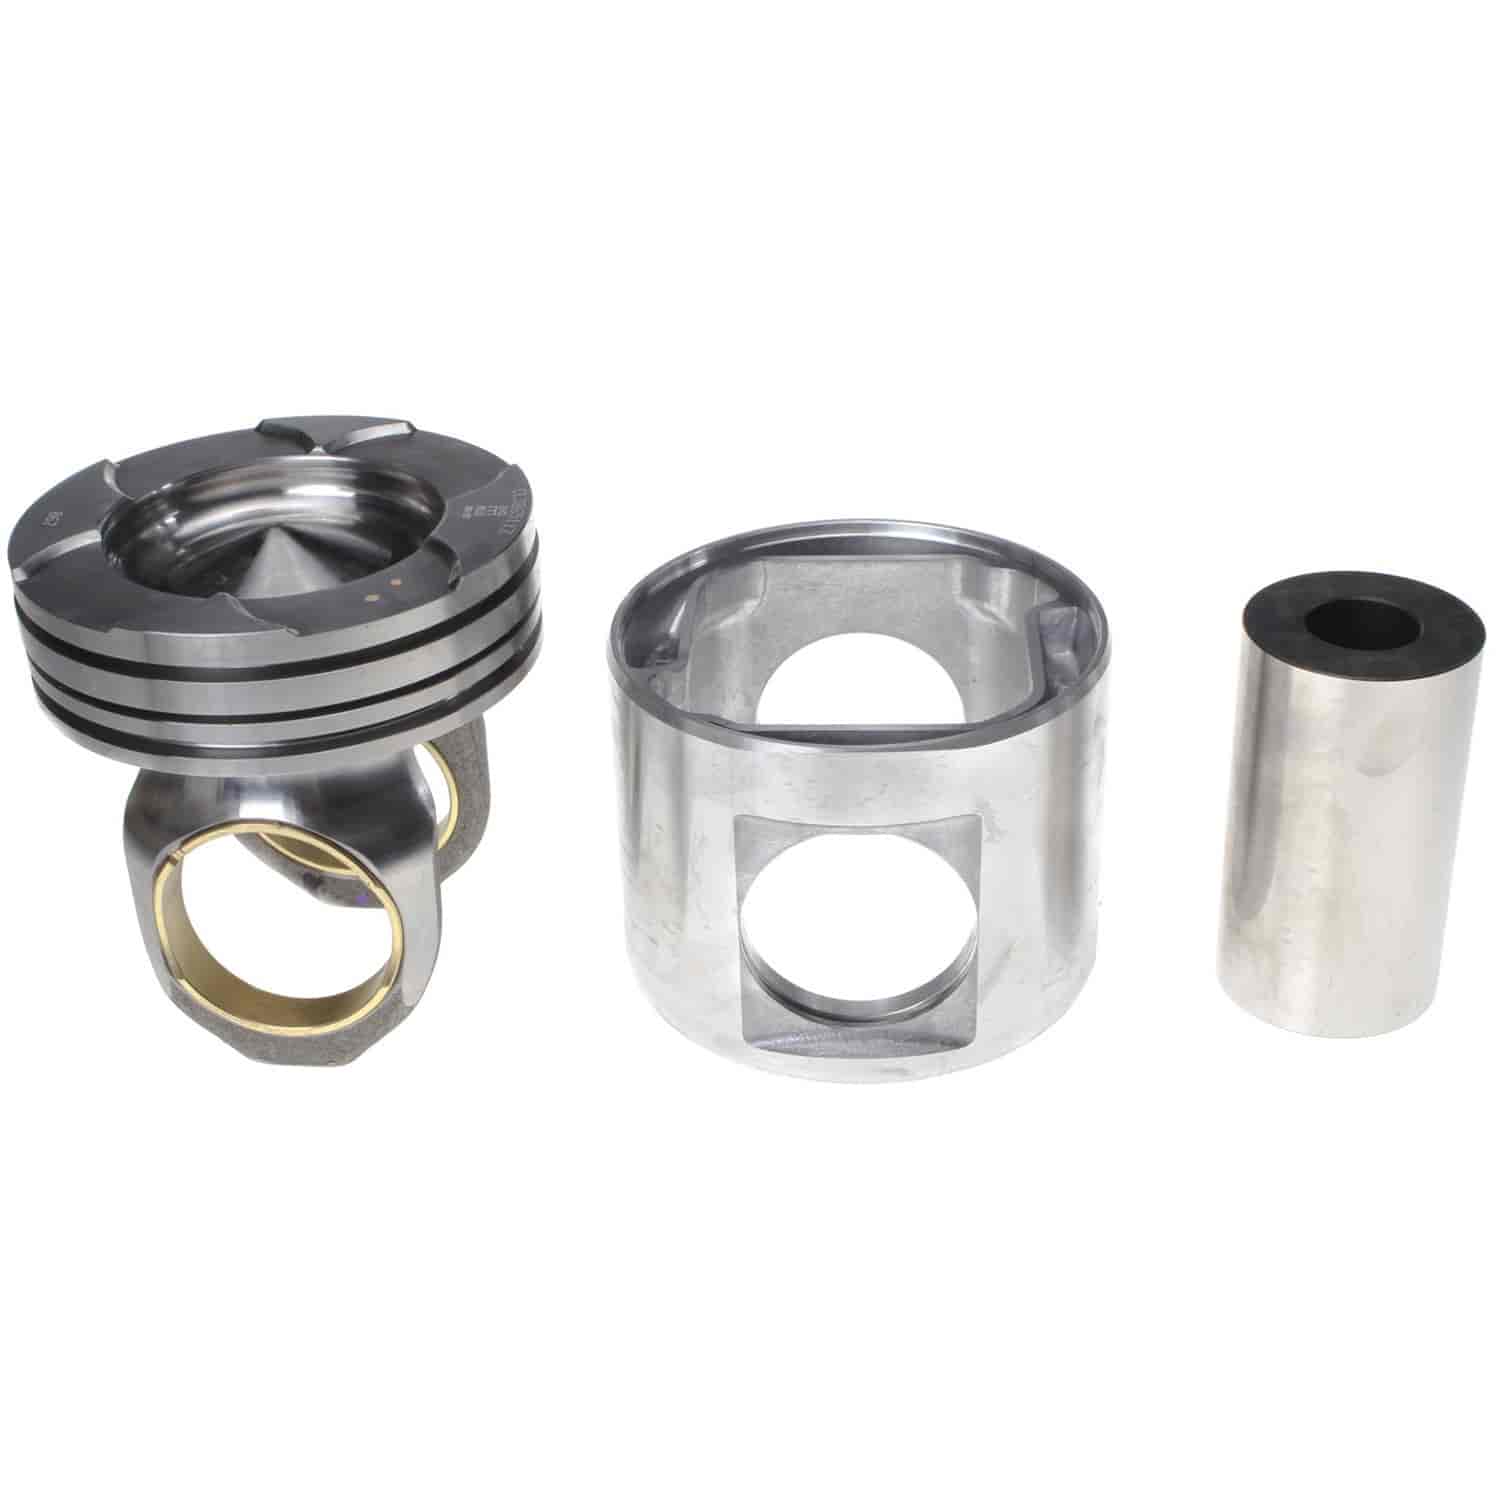 Piston Assembly for Cummins N14 Engines